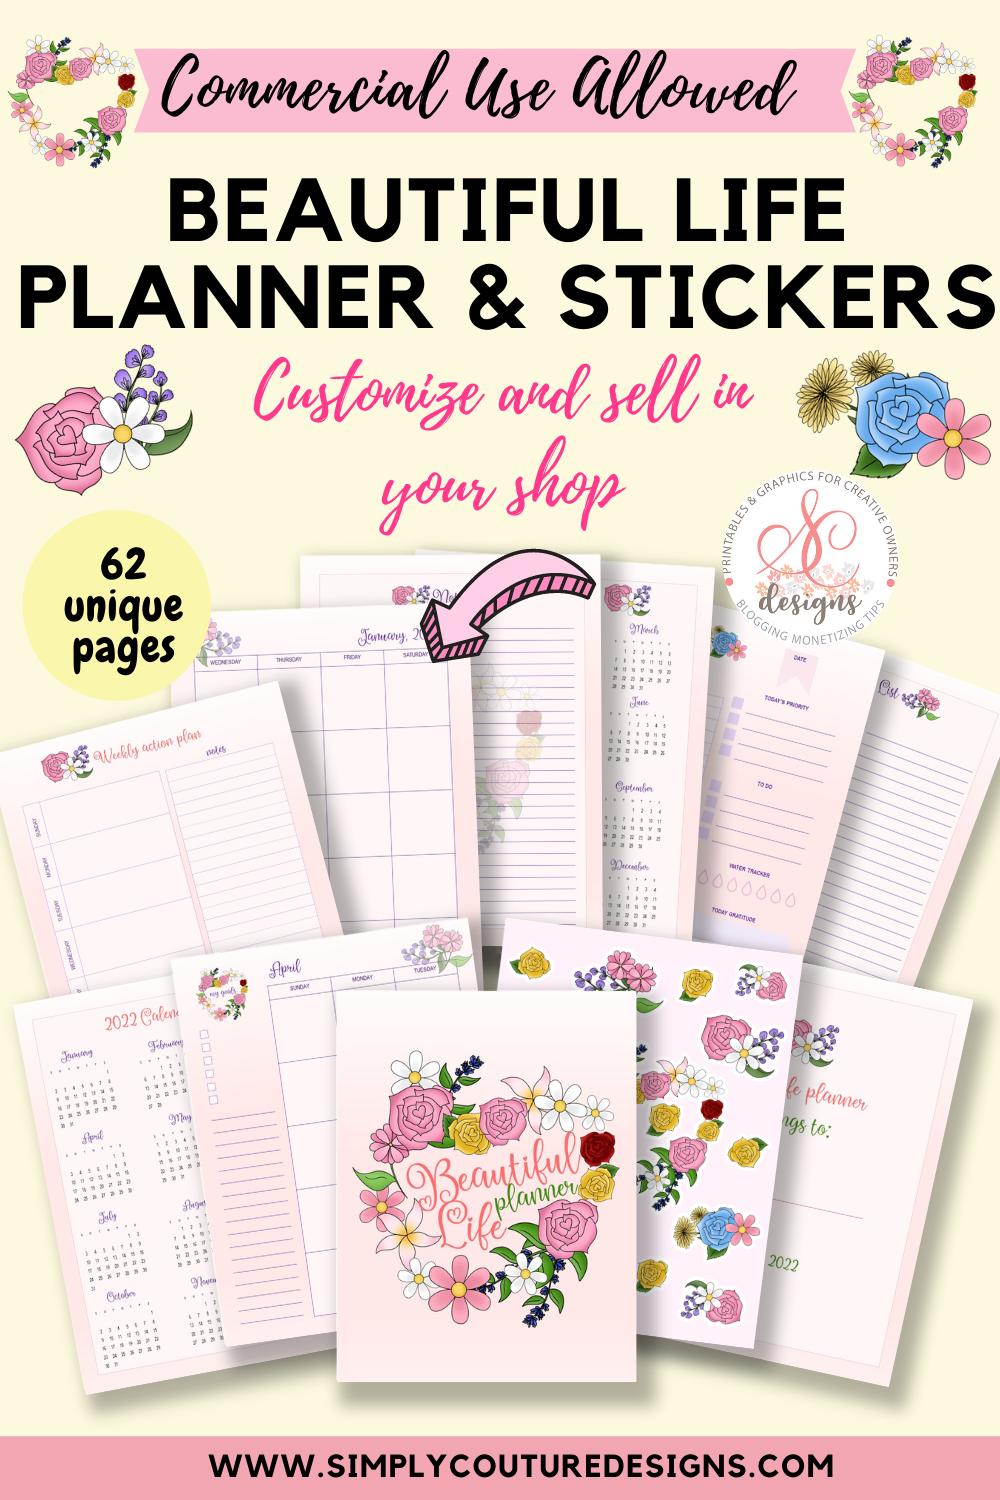 Beautiful life planner and sticker templates to create printables to sell on Etsy